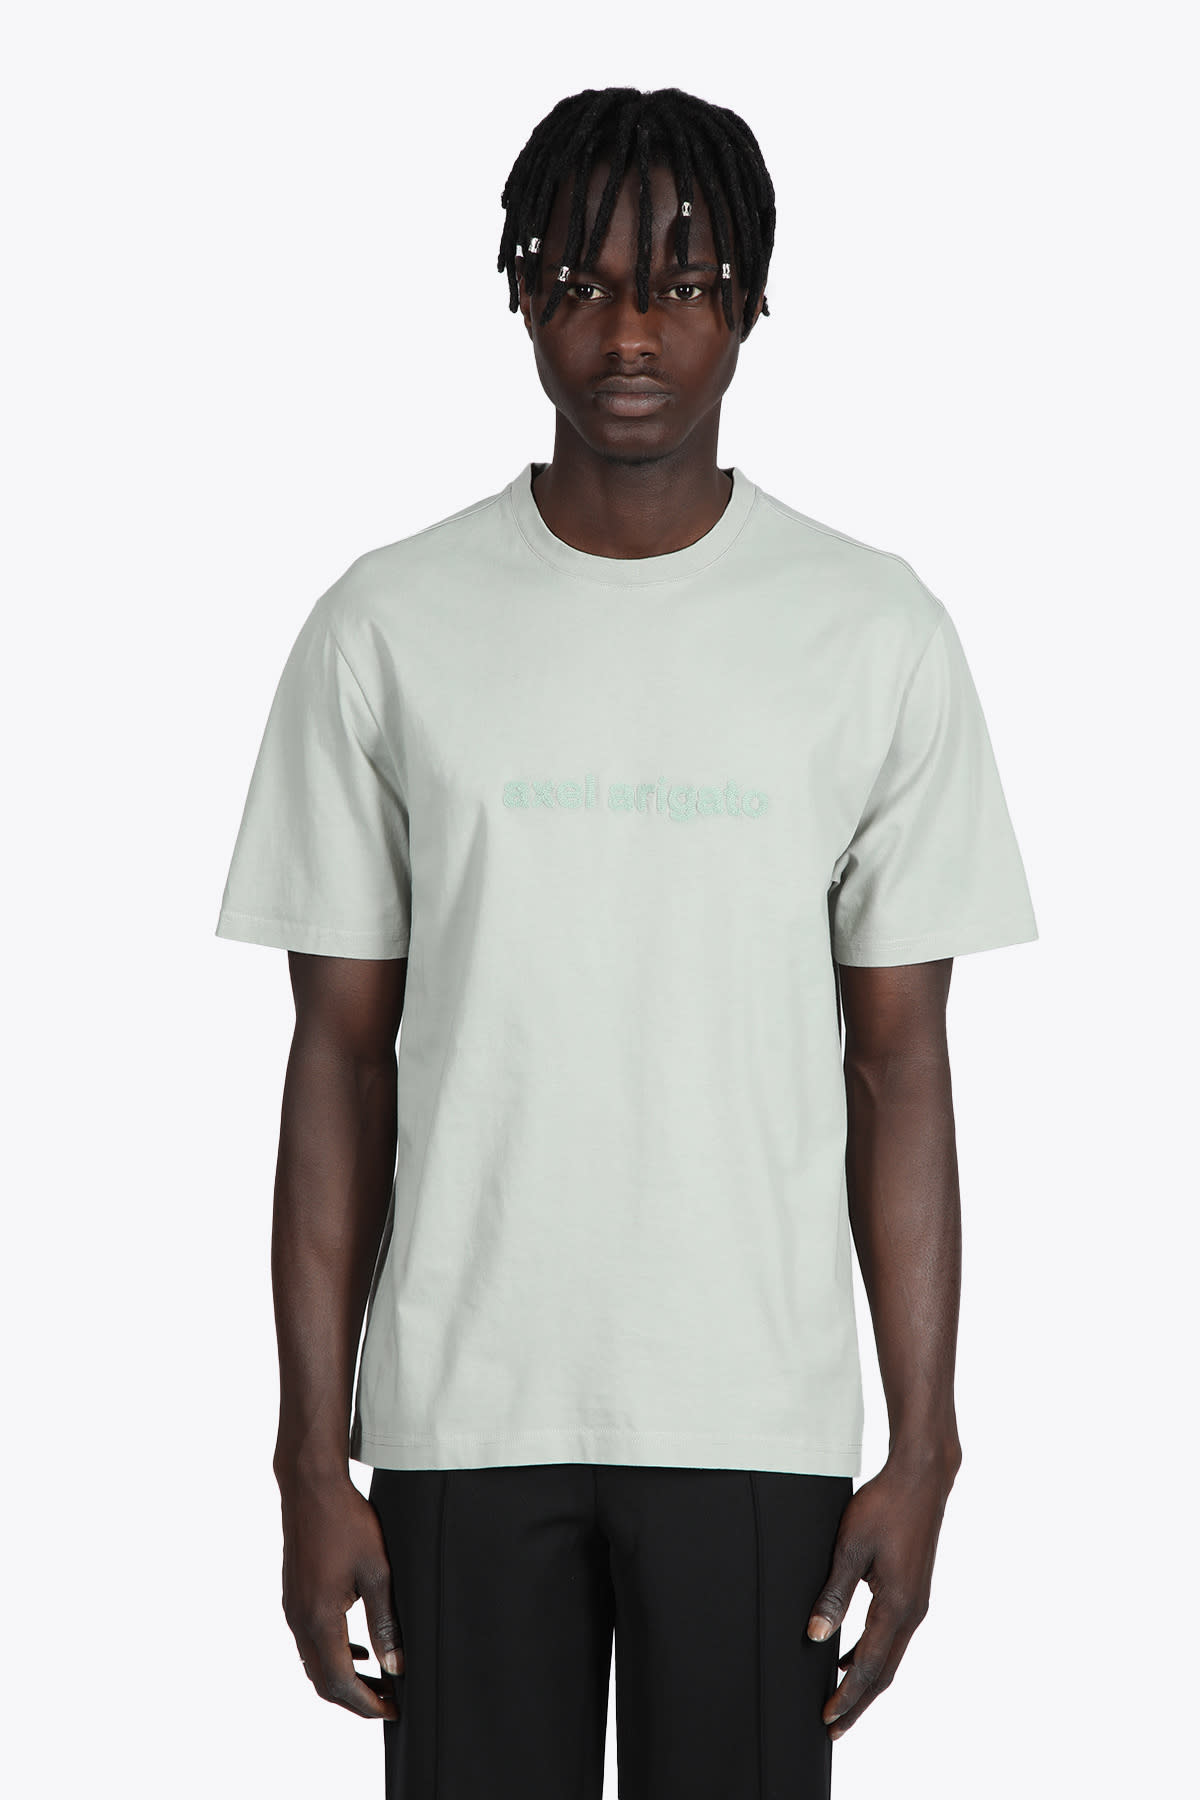 Axel Arigato Exist T-shirt Sage green cotton t-shirt with logo emrboidery - Exist T-Shirt